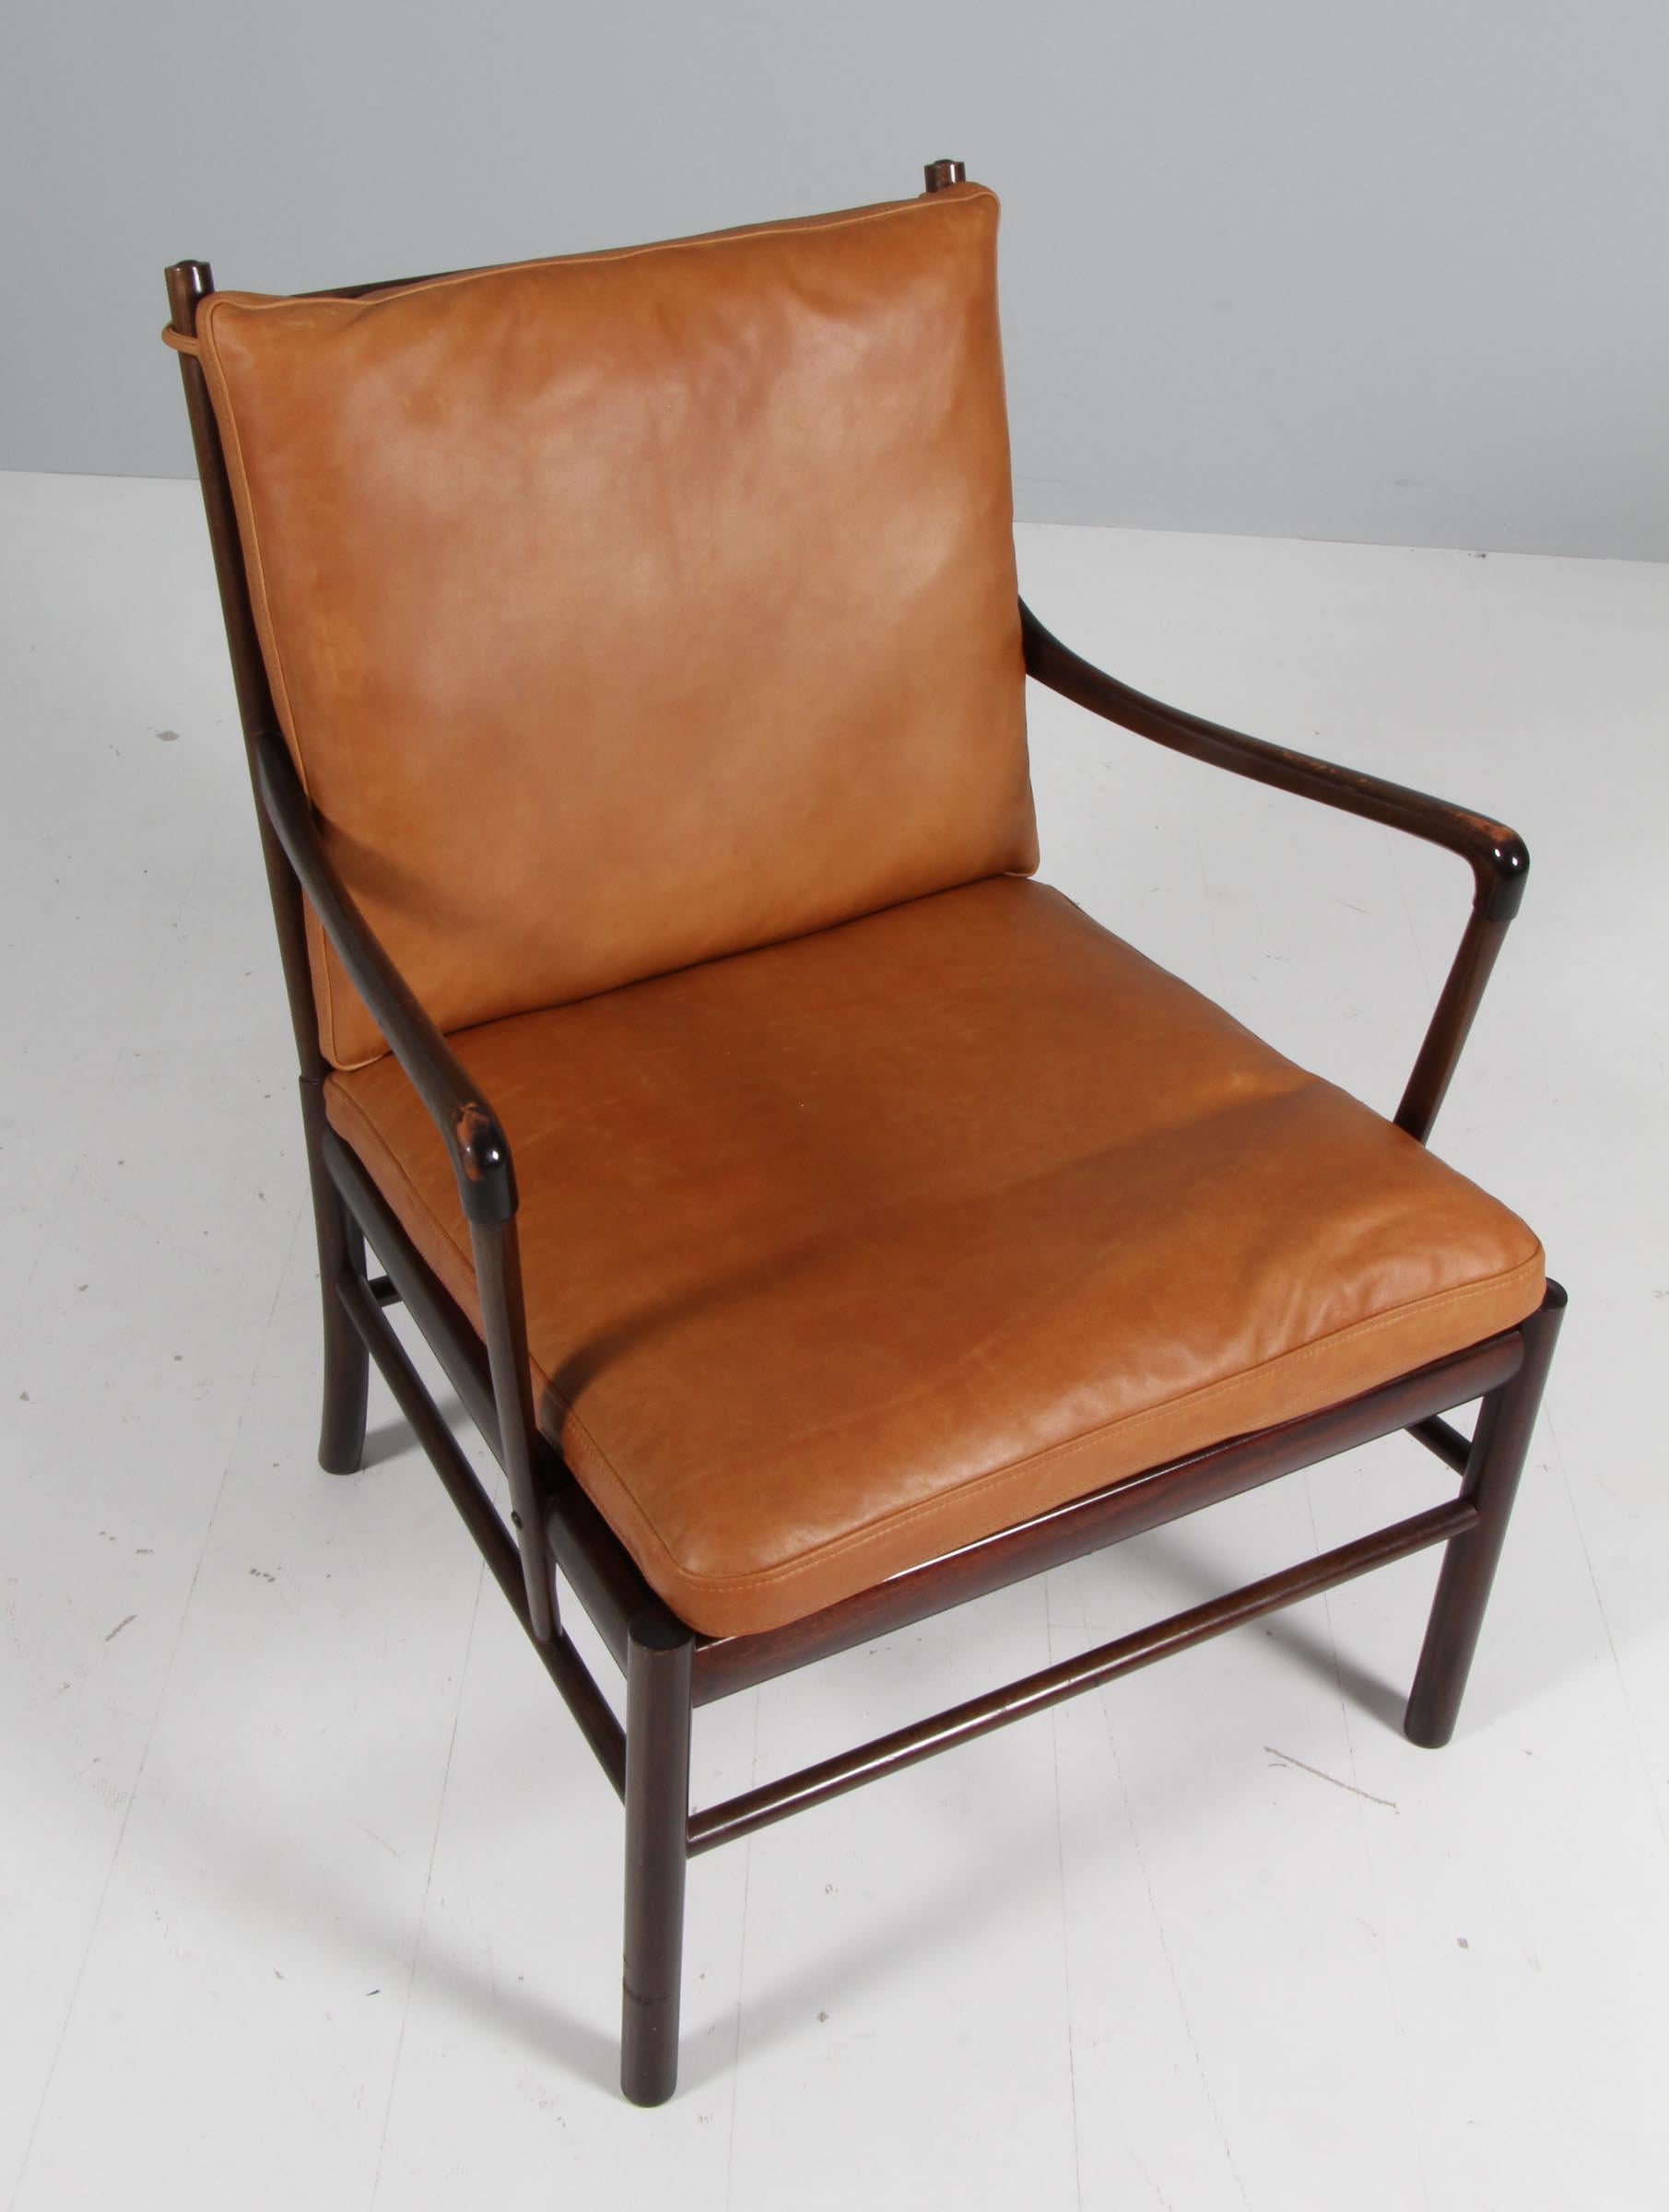 Ole Wanscher lounge chair new upholstered with cognac vintage aniline leather.

Made in laquered mahogany. 

Model colonial chair, made by Poul Jeppesen.